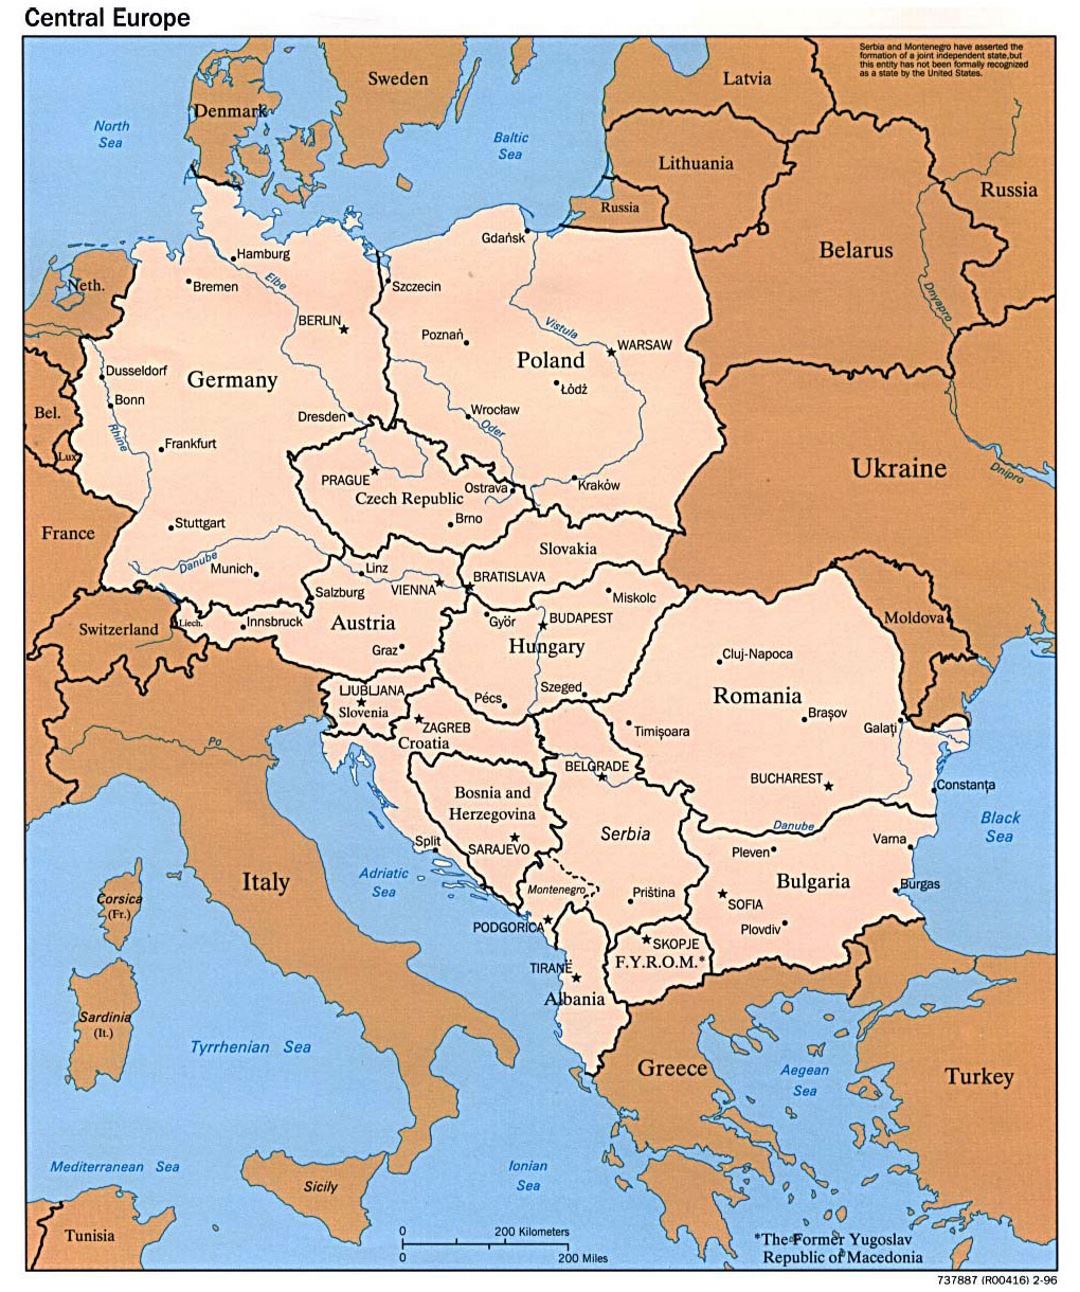 Political map of Central Europe - 1996